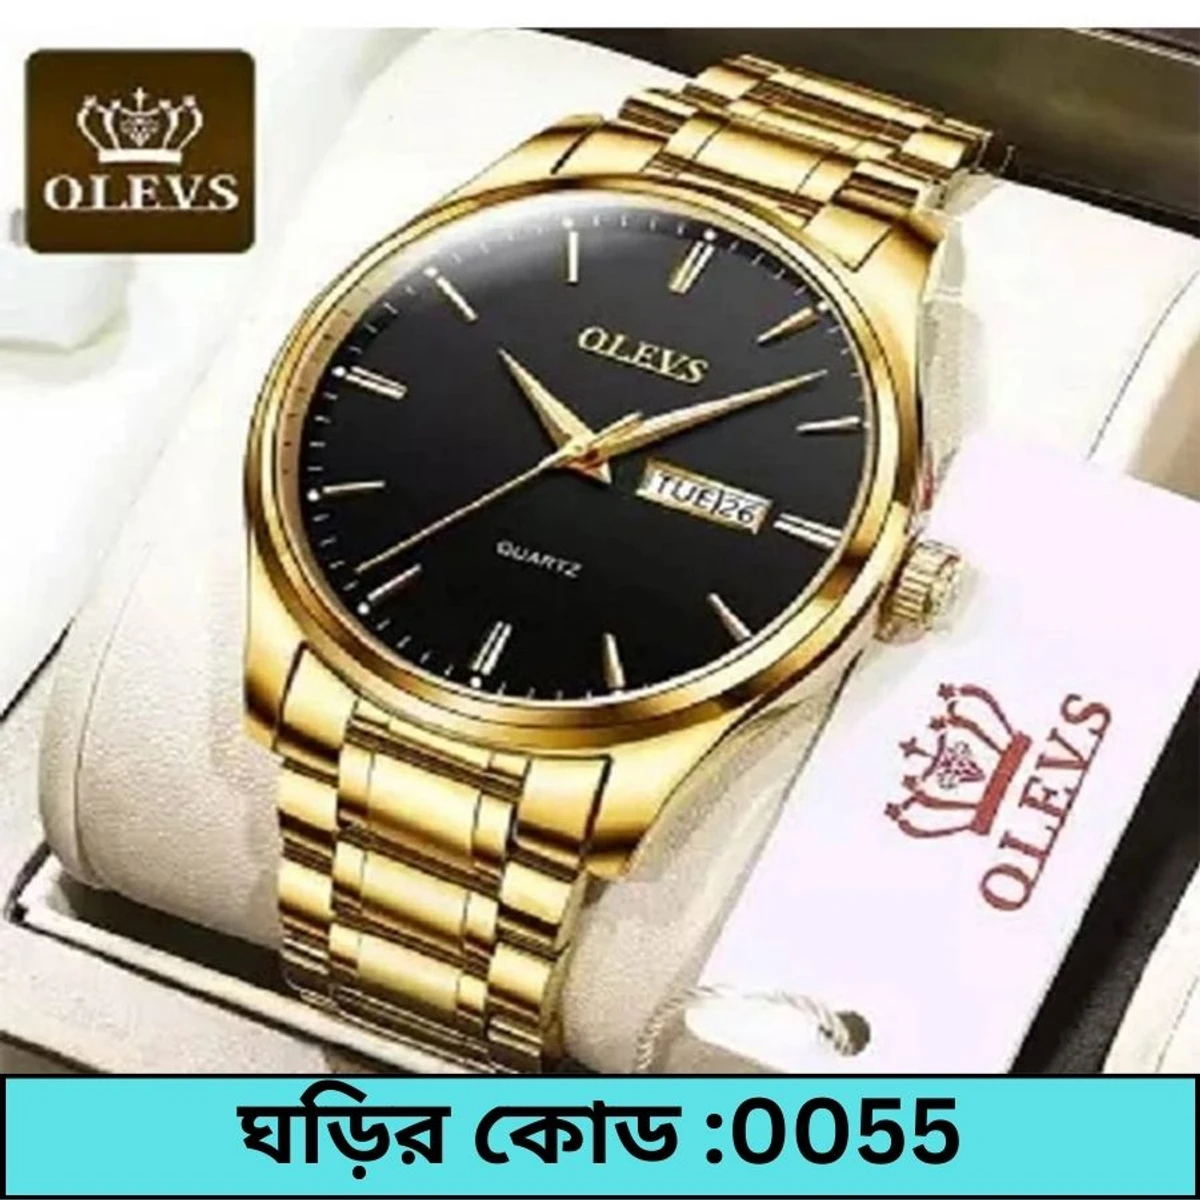 Olevs 6898 Black Stainless Steel Analoge Wrist Watch For Men Golden  Chain dial black colour watch- MAN  WATCH